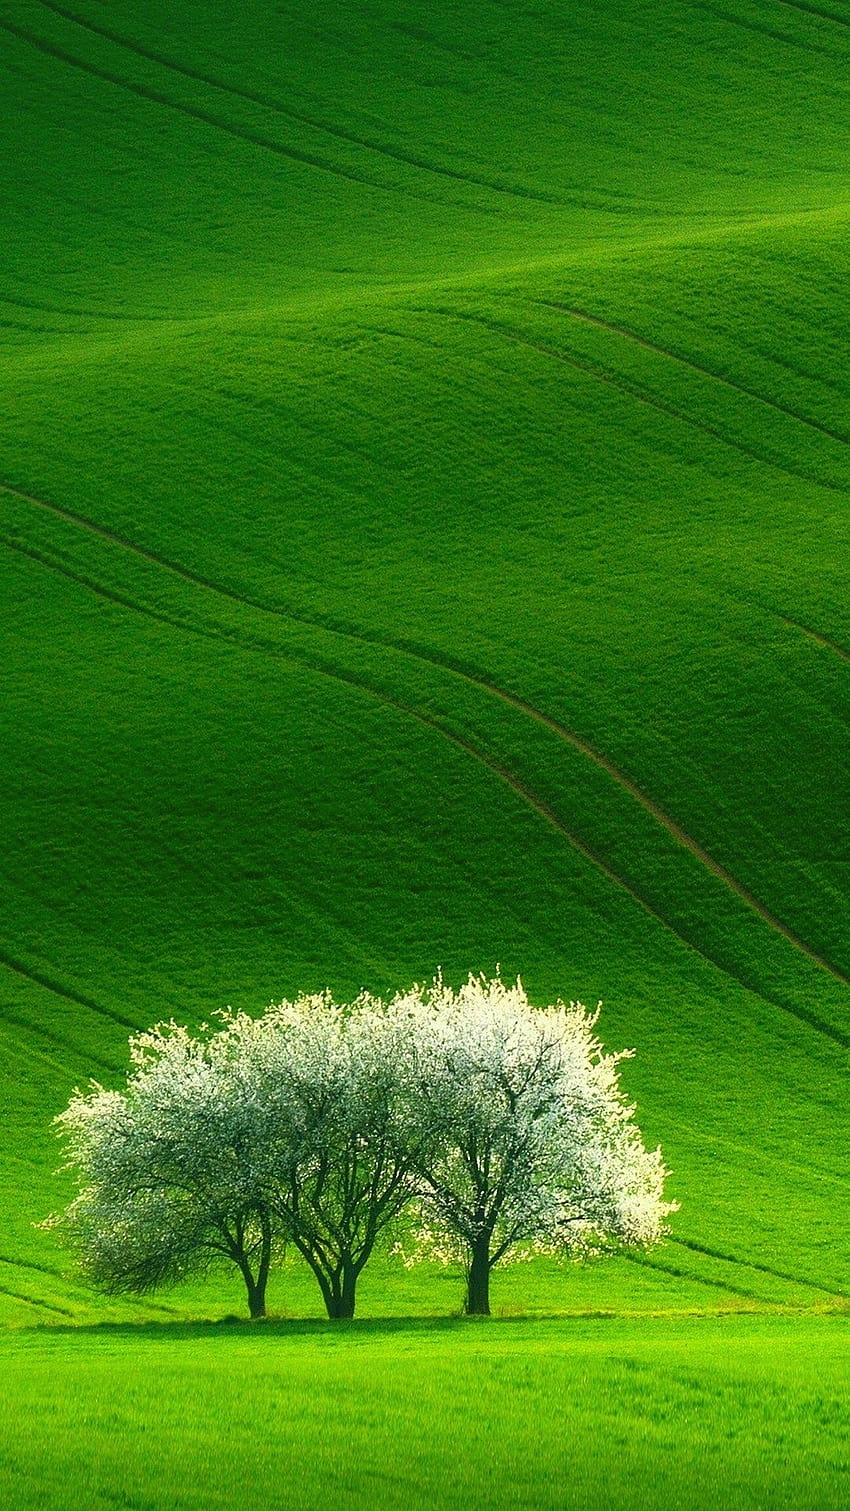 Green Beautiful Nature Scenery Android ⋆ Traxzee, green scenery android  mobile HD phone wallpaper | Pxfuel